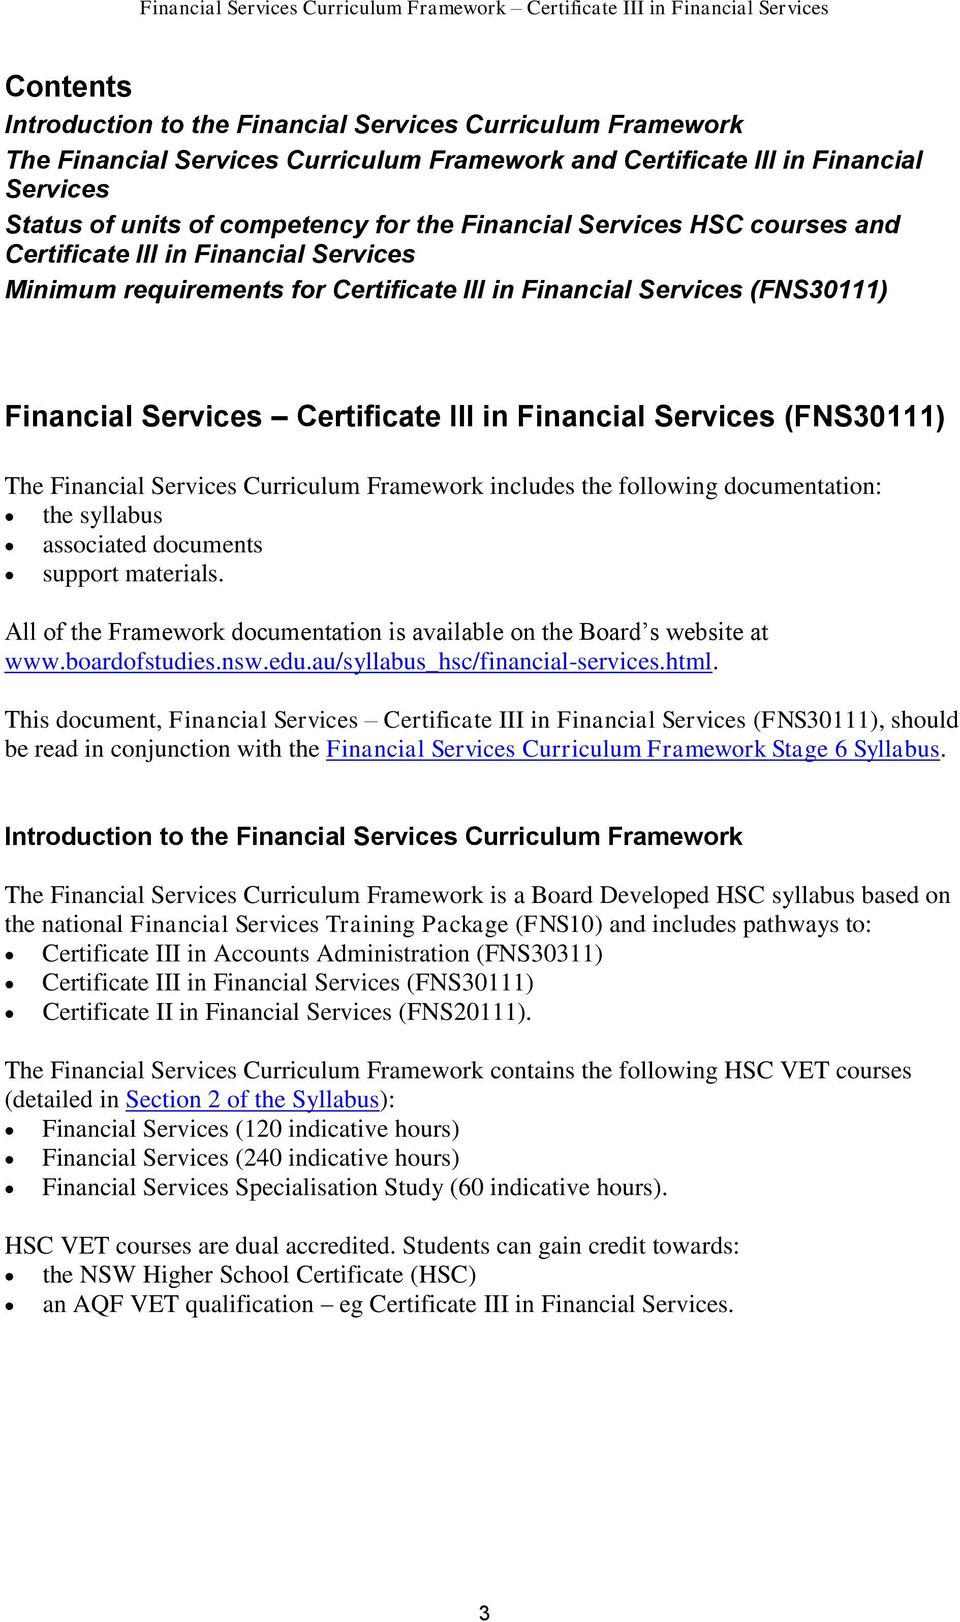 Services (FNS30111) The Financial Services Curriculum Framework includes the following documentation: the syllabus associated documents support materials.